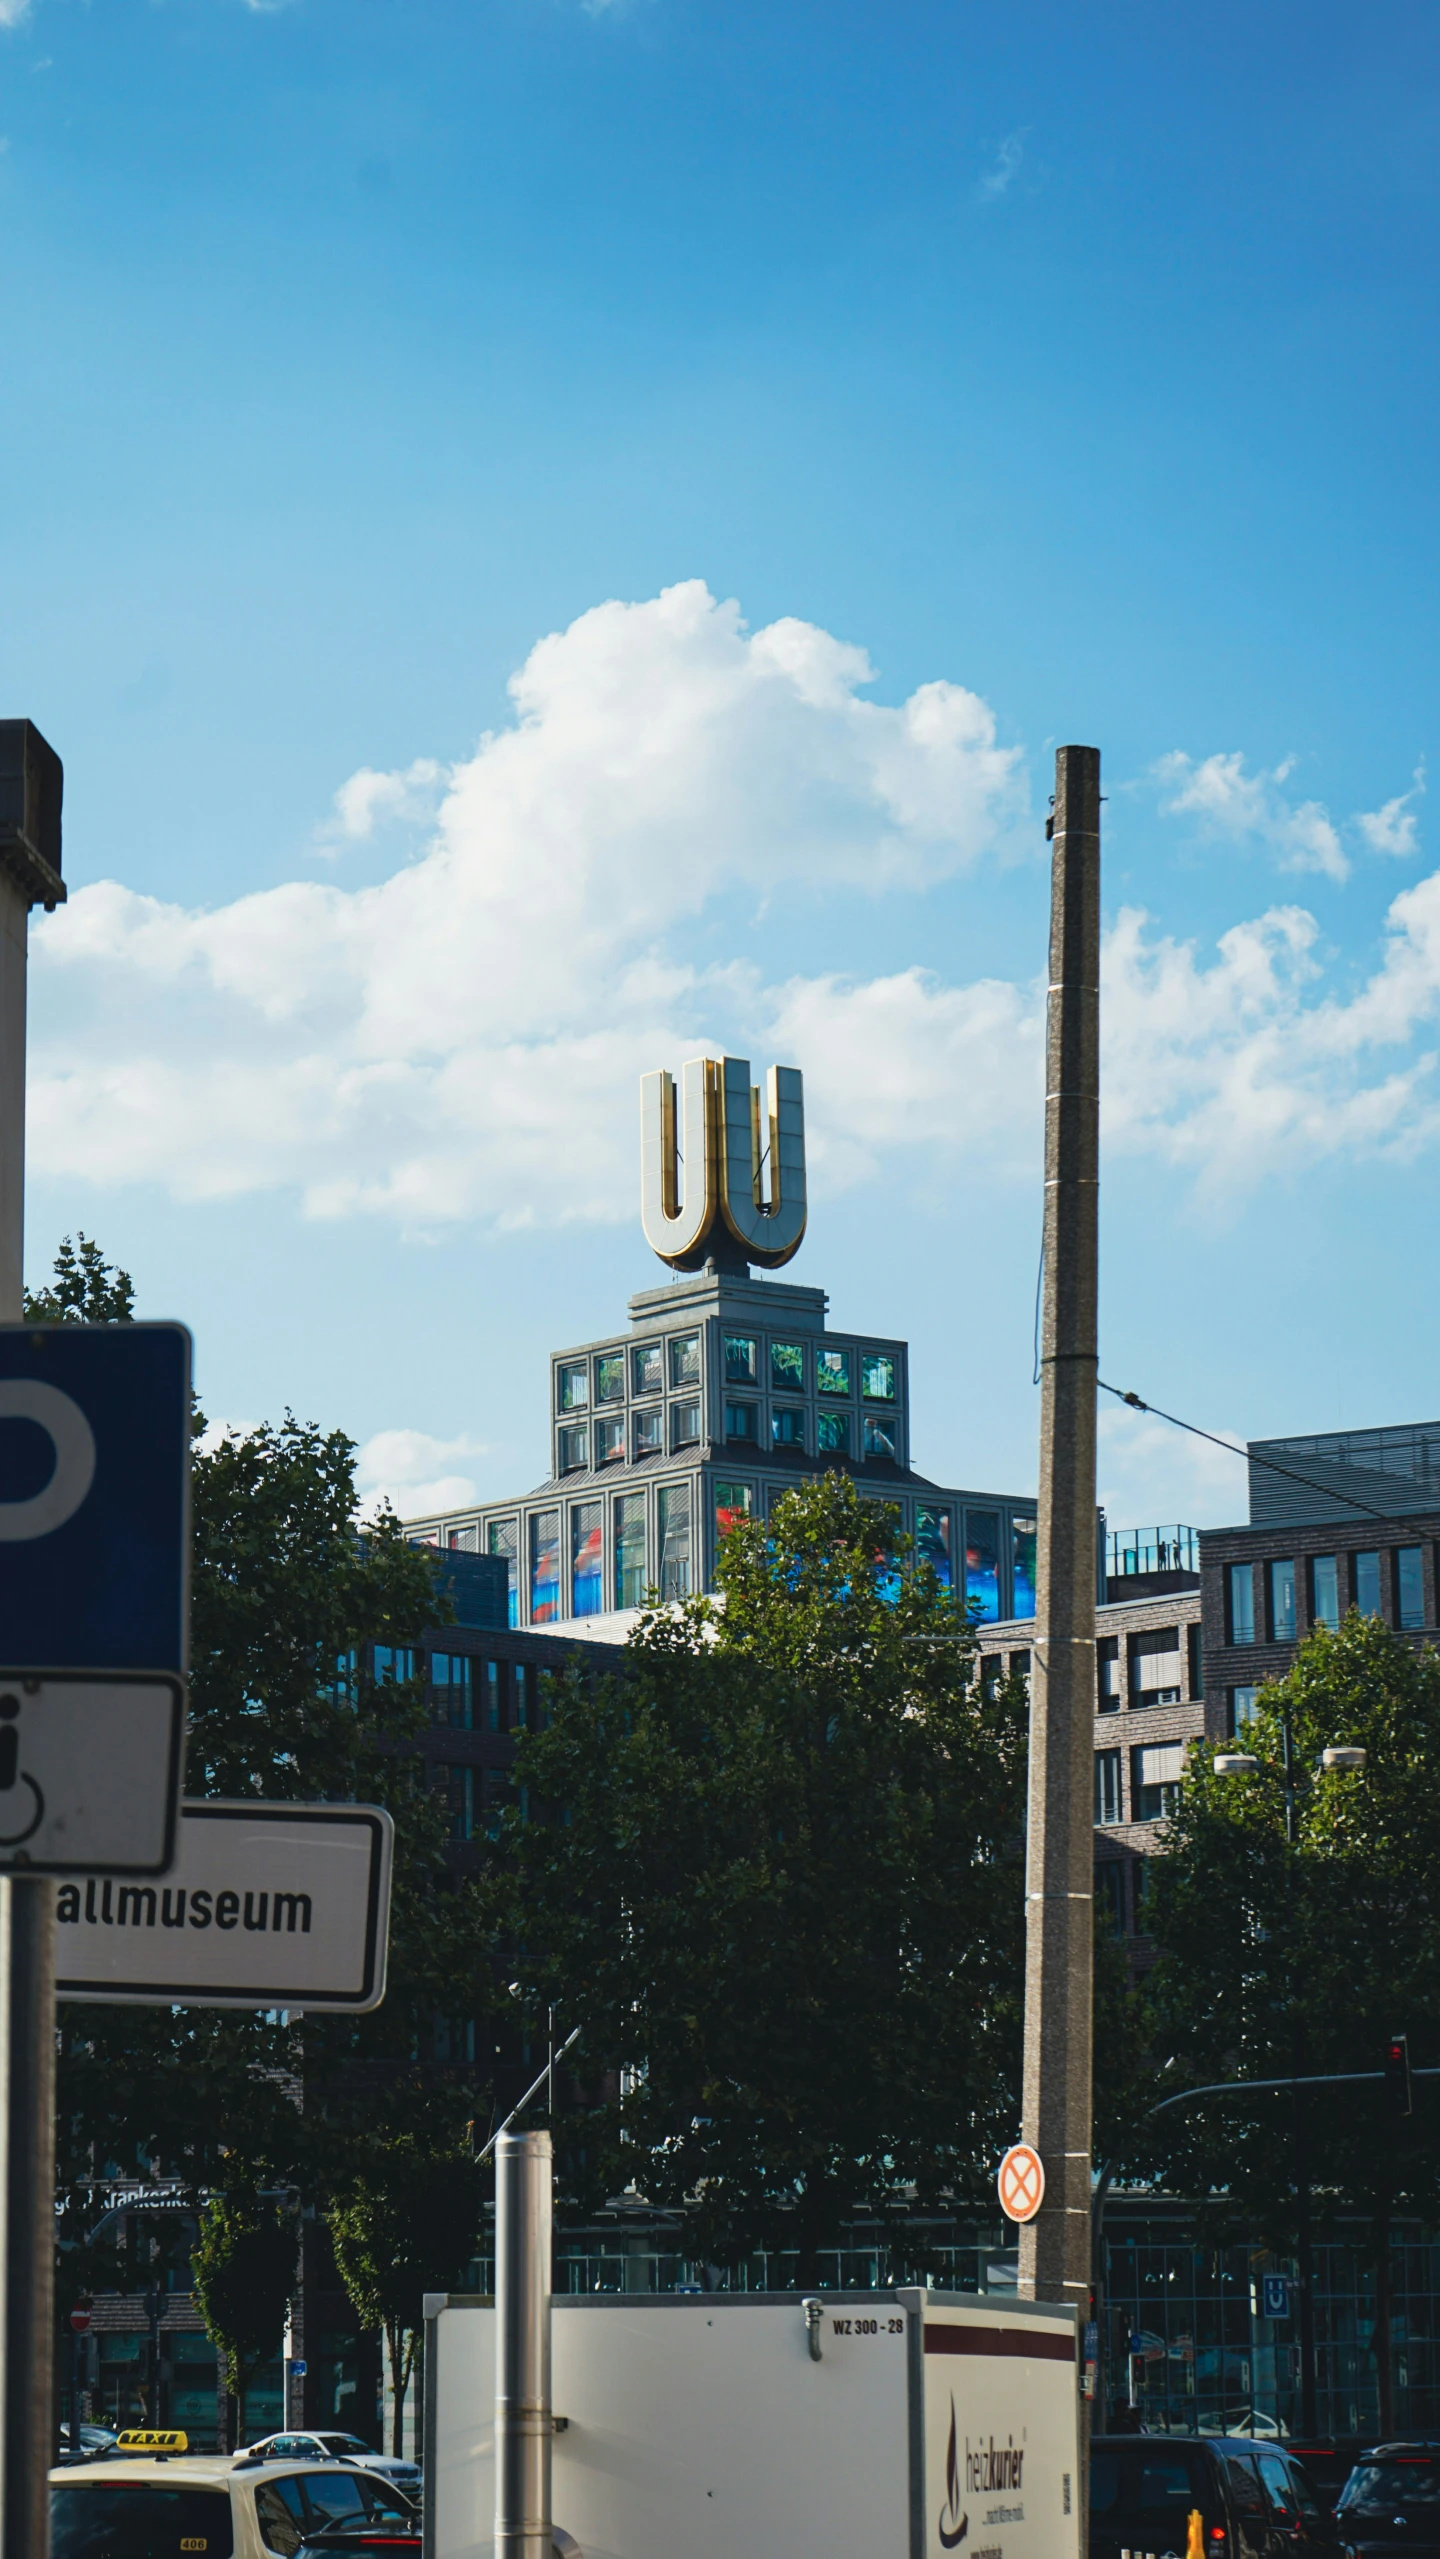 a picture of a street with traffic signs and tall buildings in the background